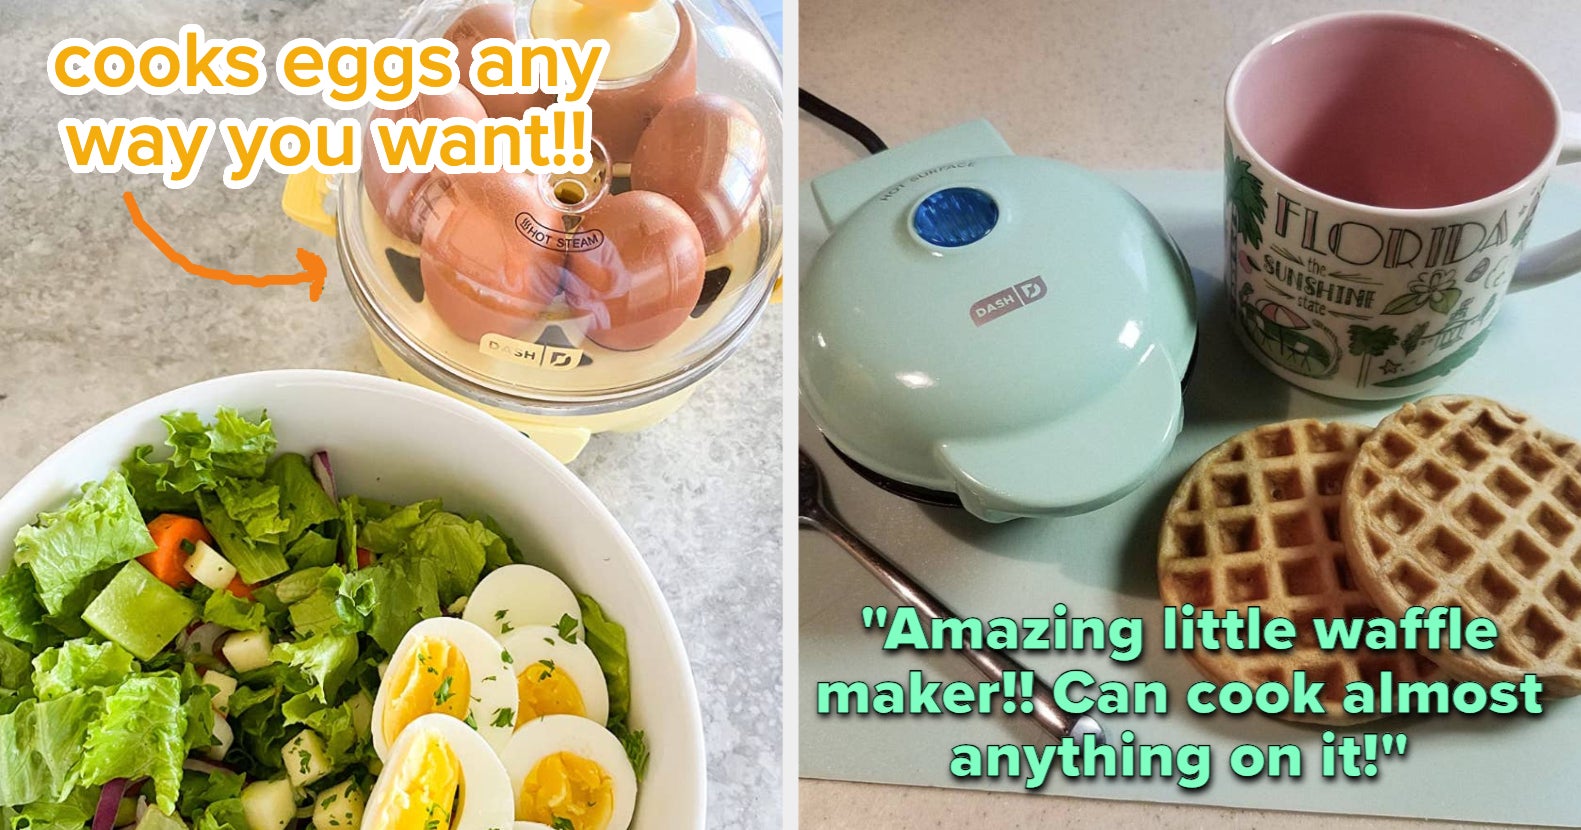  Egg Cocker Baked Potato Microwave Cooker SEEN-ON-TV Tender  Fluffy Cooks in Minutes Steamer, Dishwasher-Safe Kitchen Gadgets, 8 Inches  Clear: Home & Kitchen